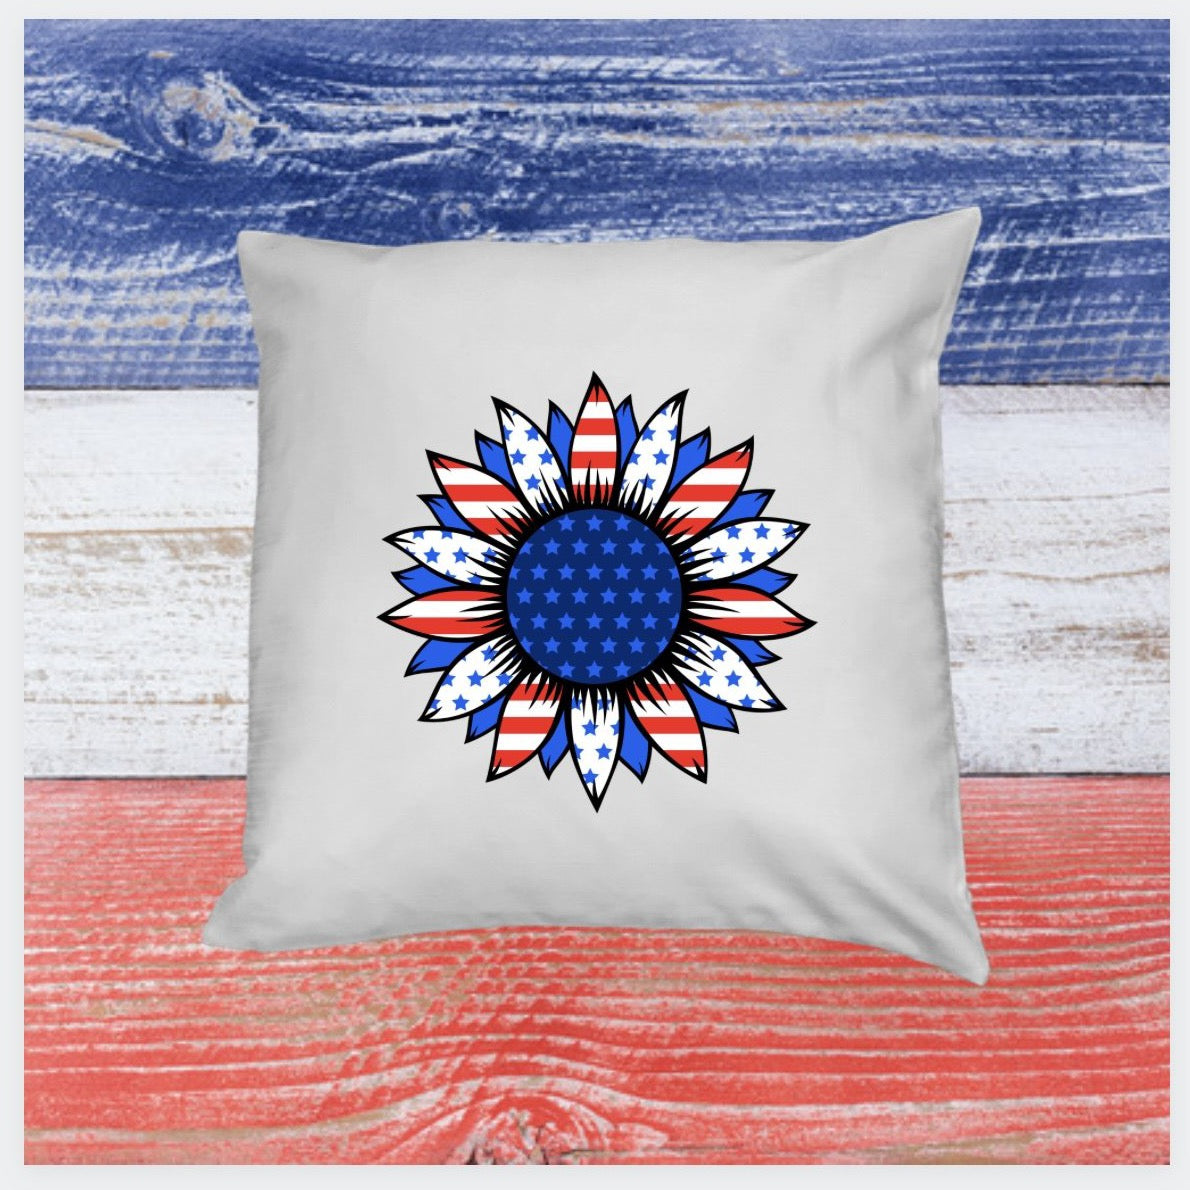 Red Stars & Stripes Patriotic Collection Fabric Pillow Covers